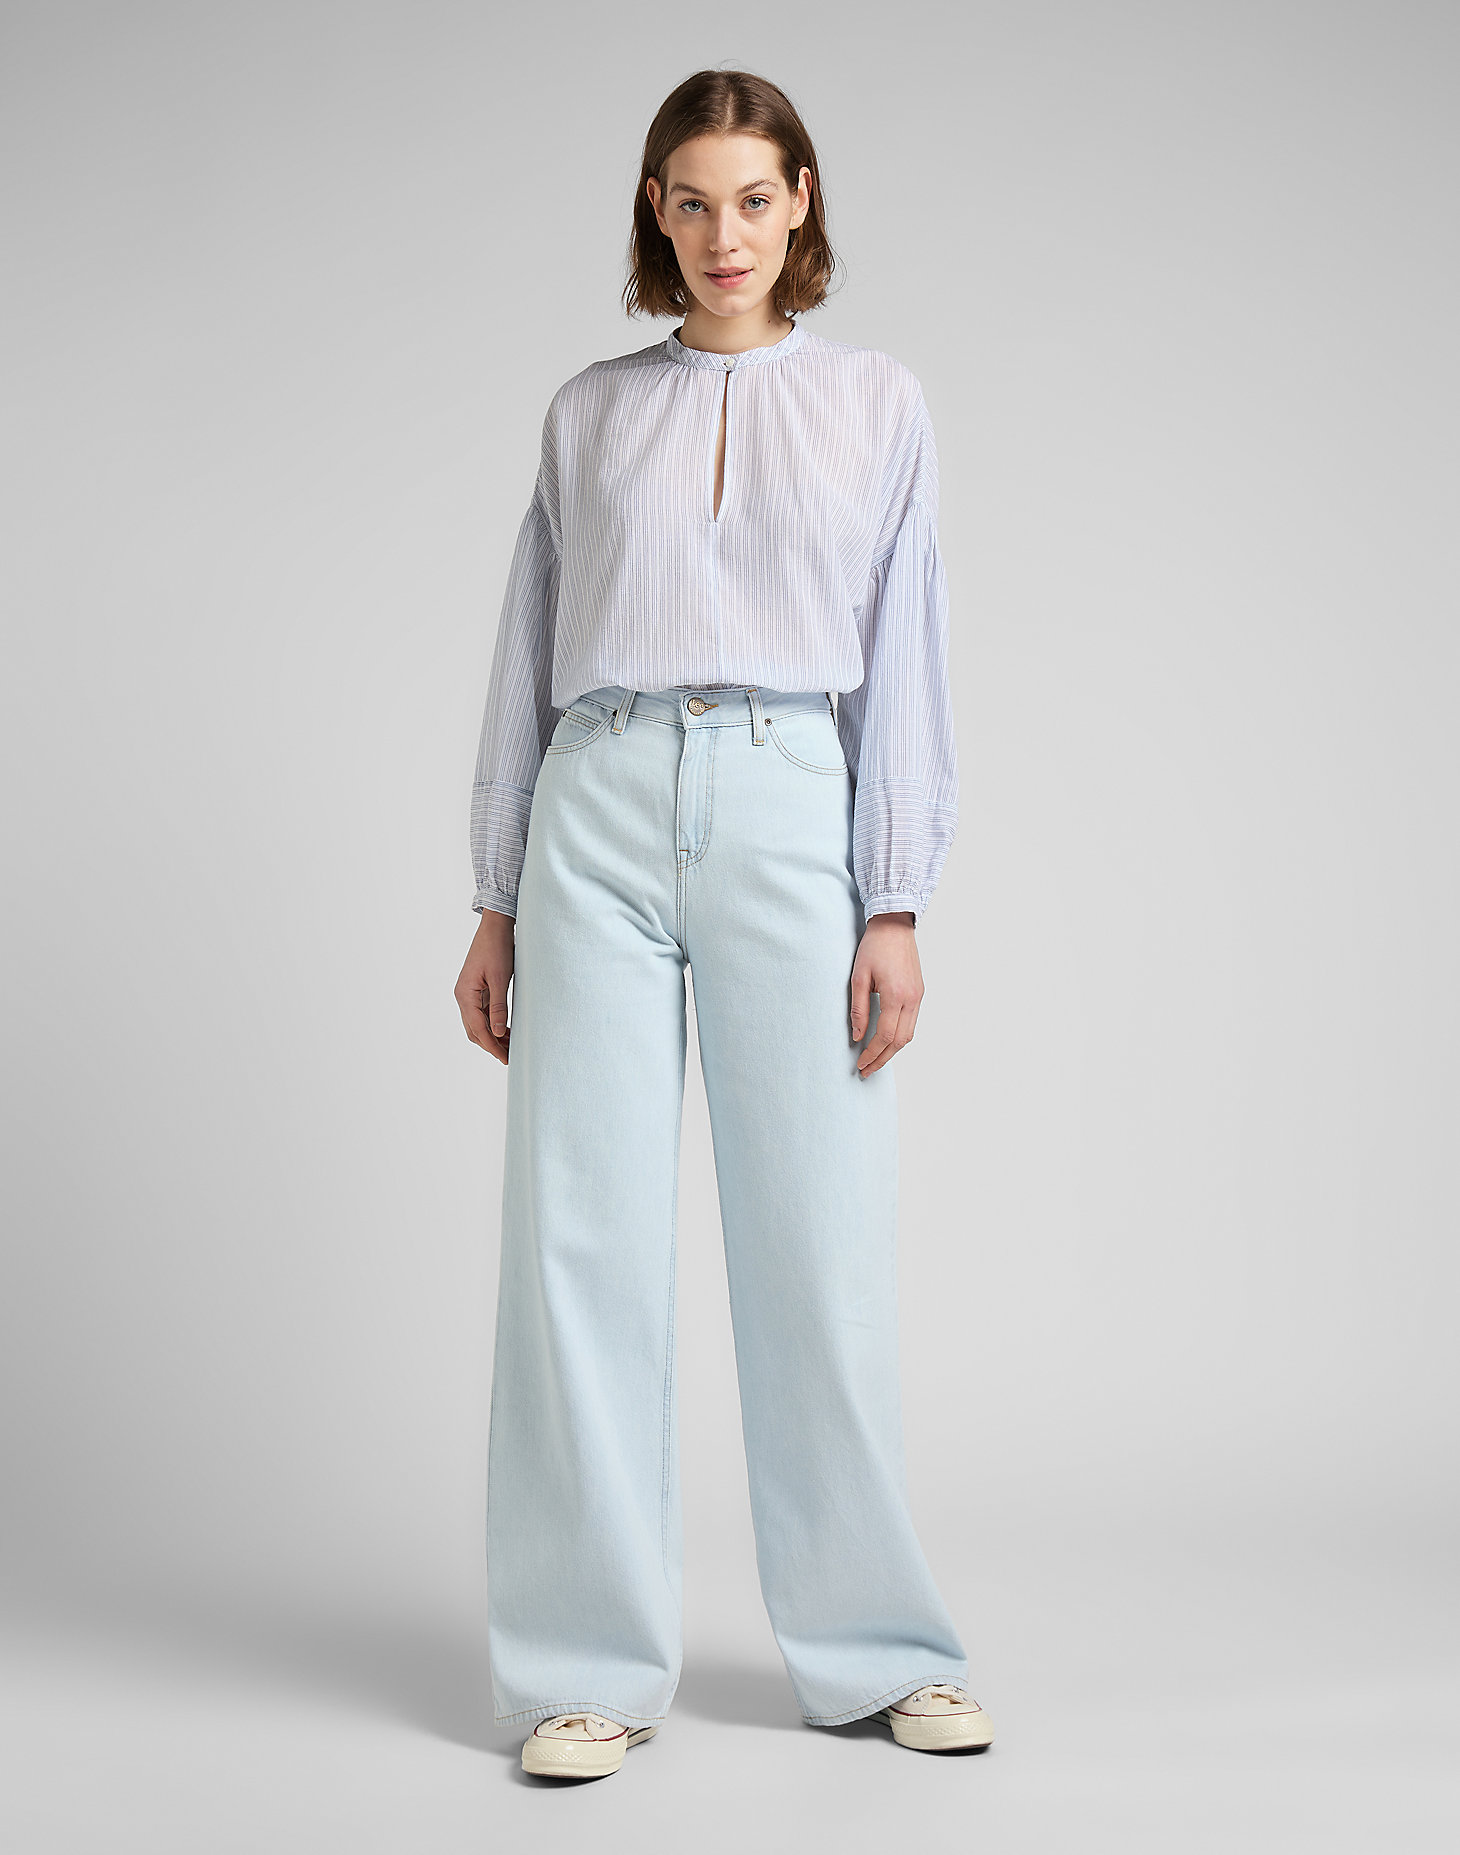 Relaxed Blouse in Bright White alternative view 2